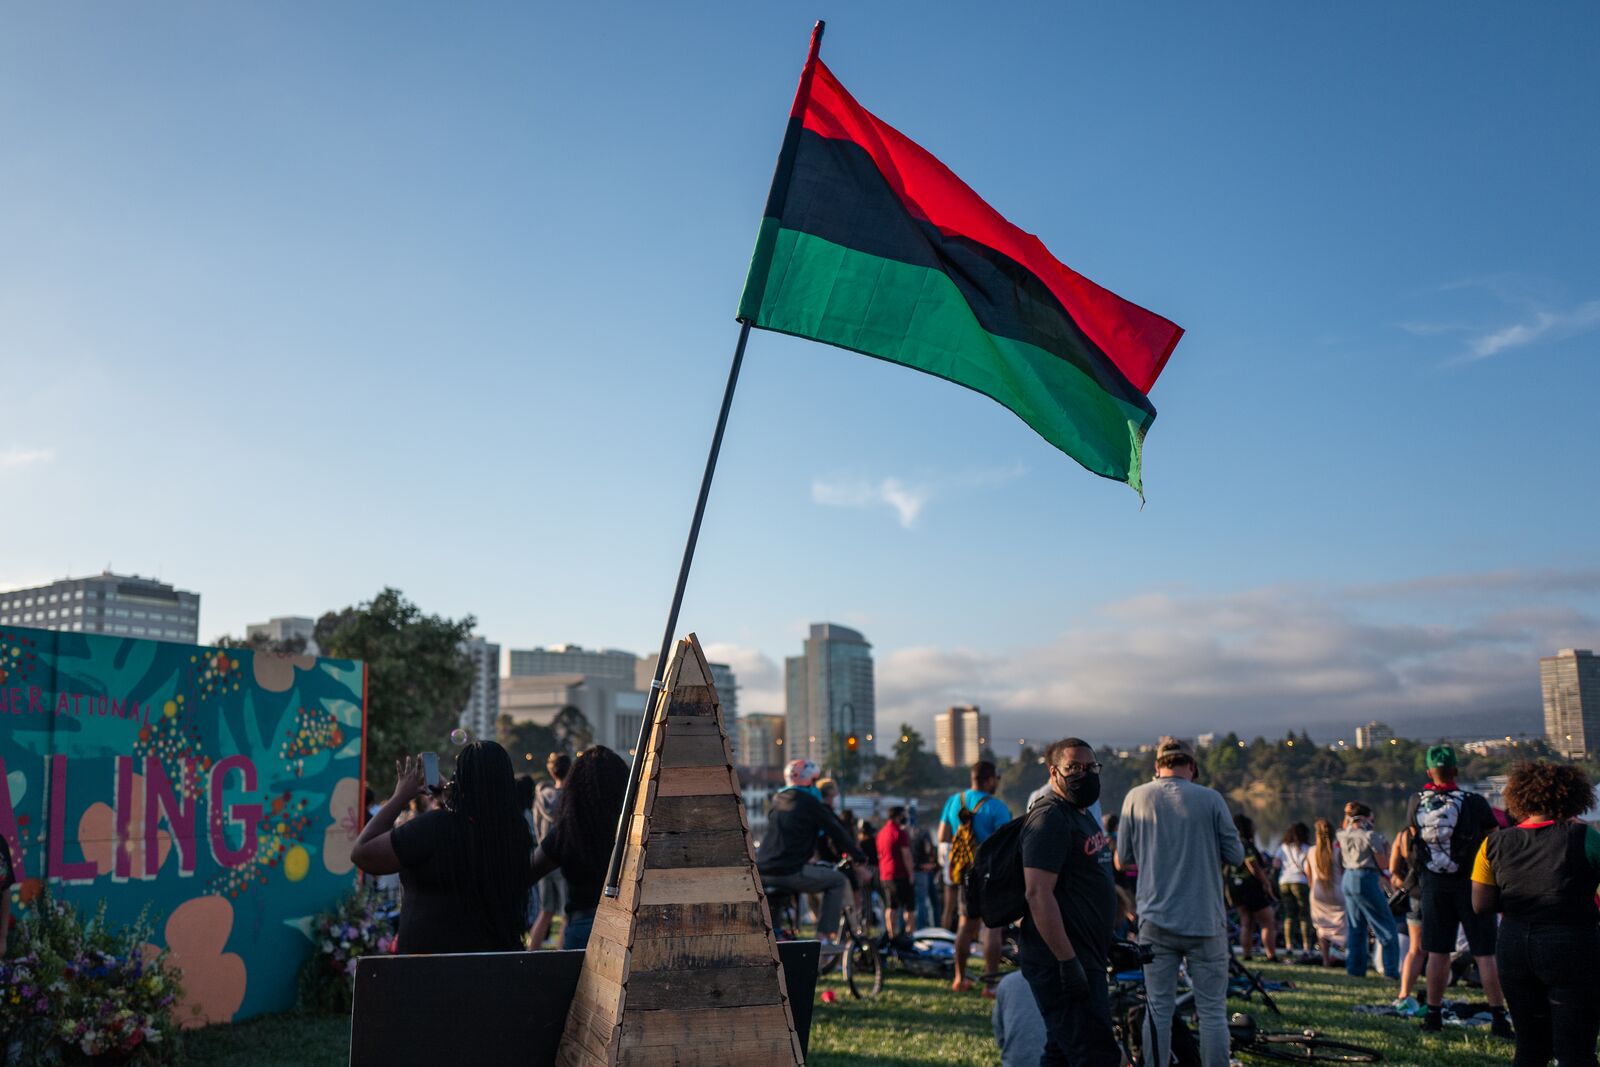 A pan-African flag rises above a crowd of people gathered with buildings in the background